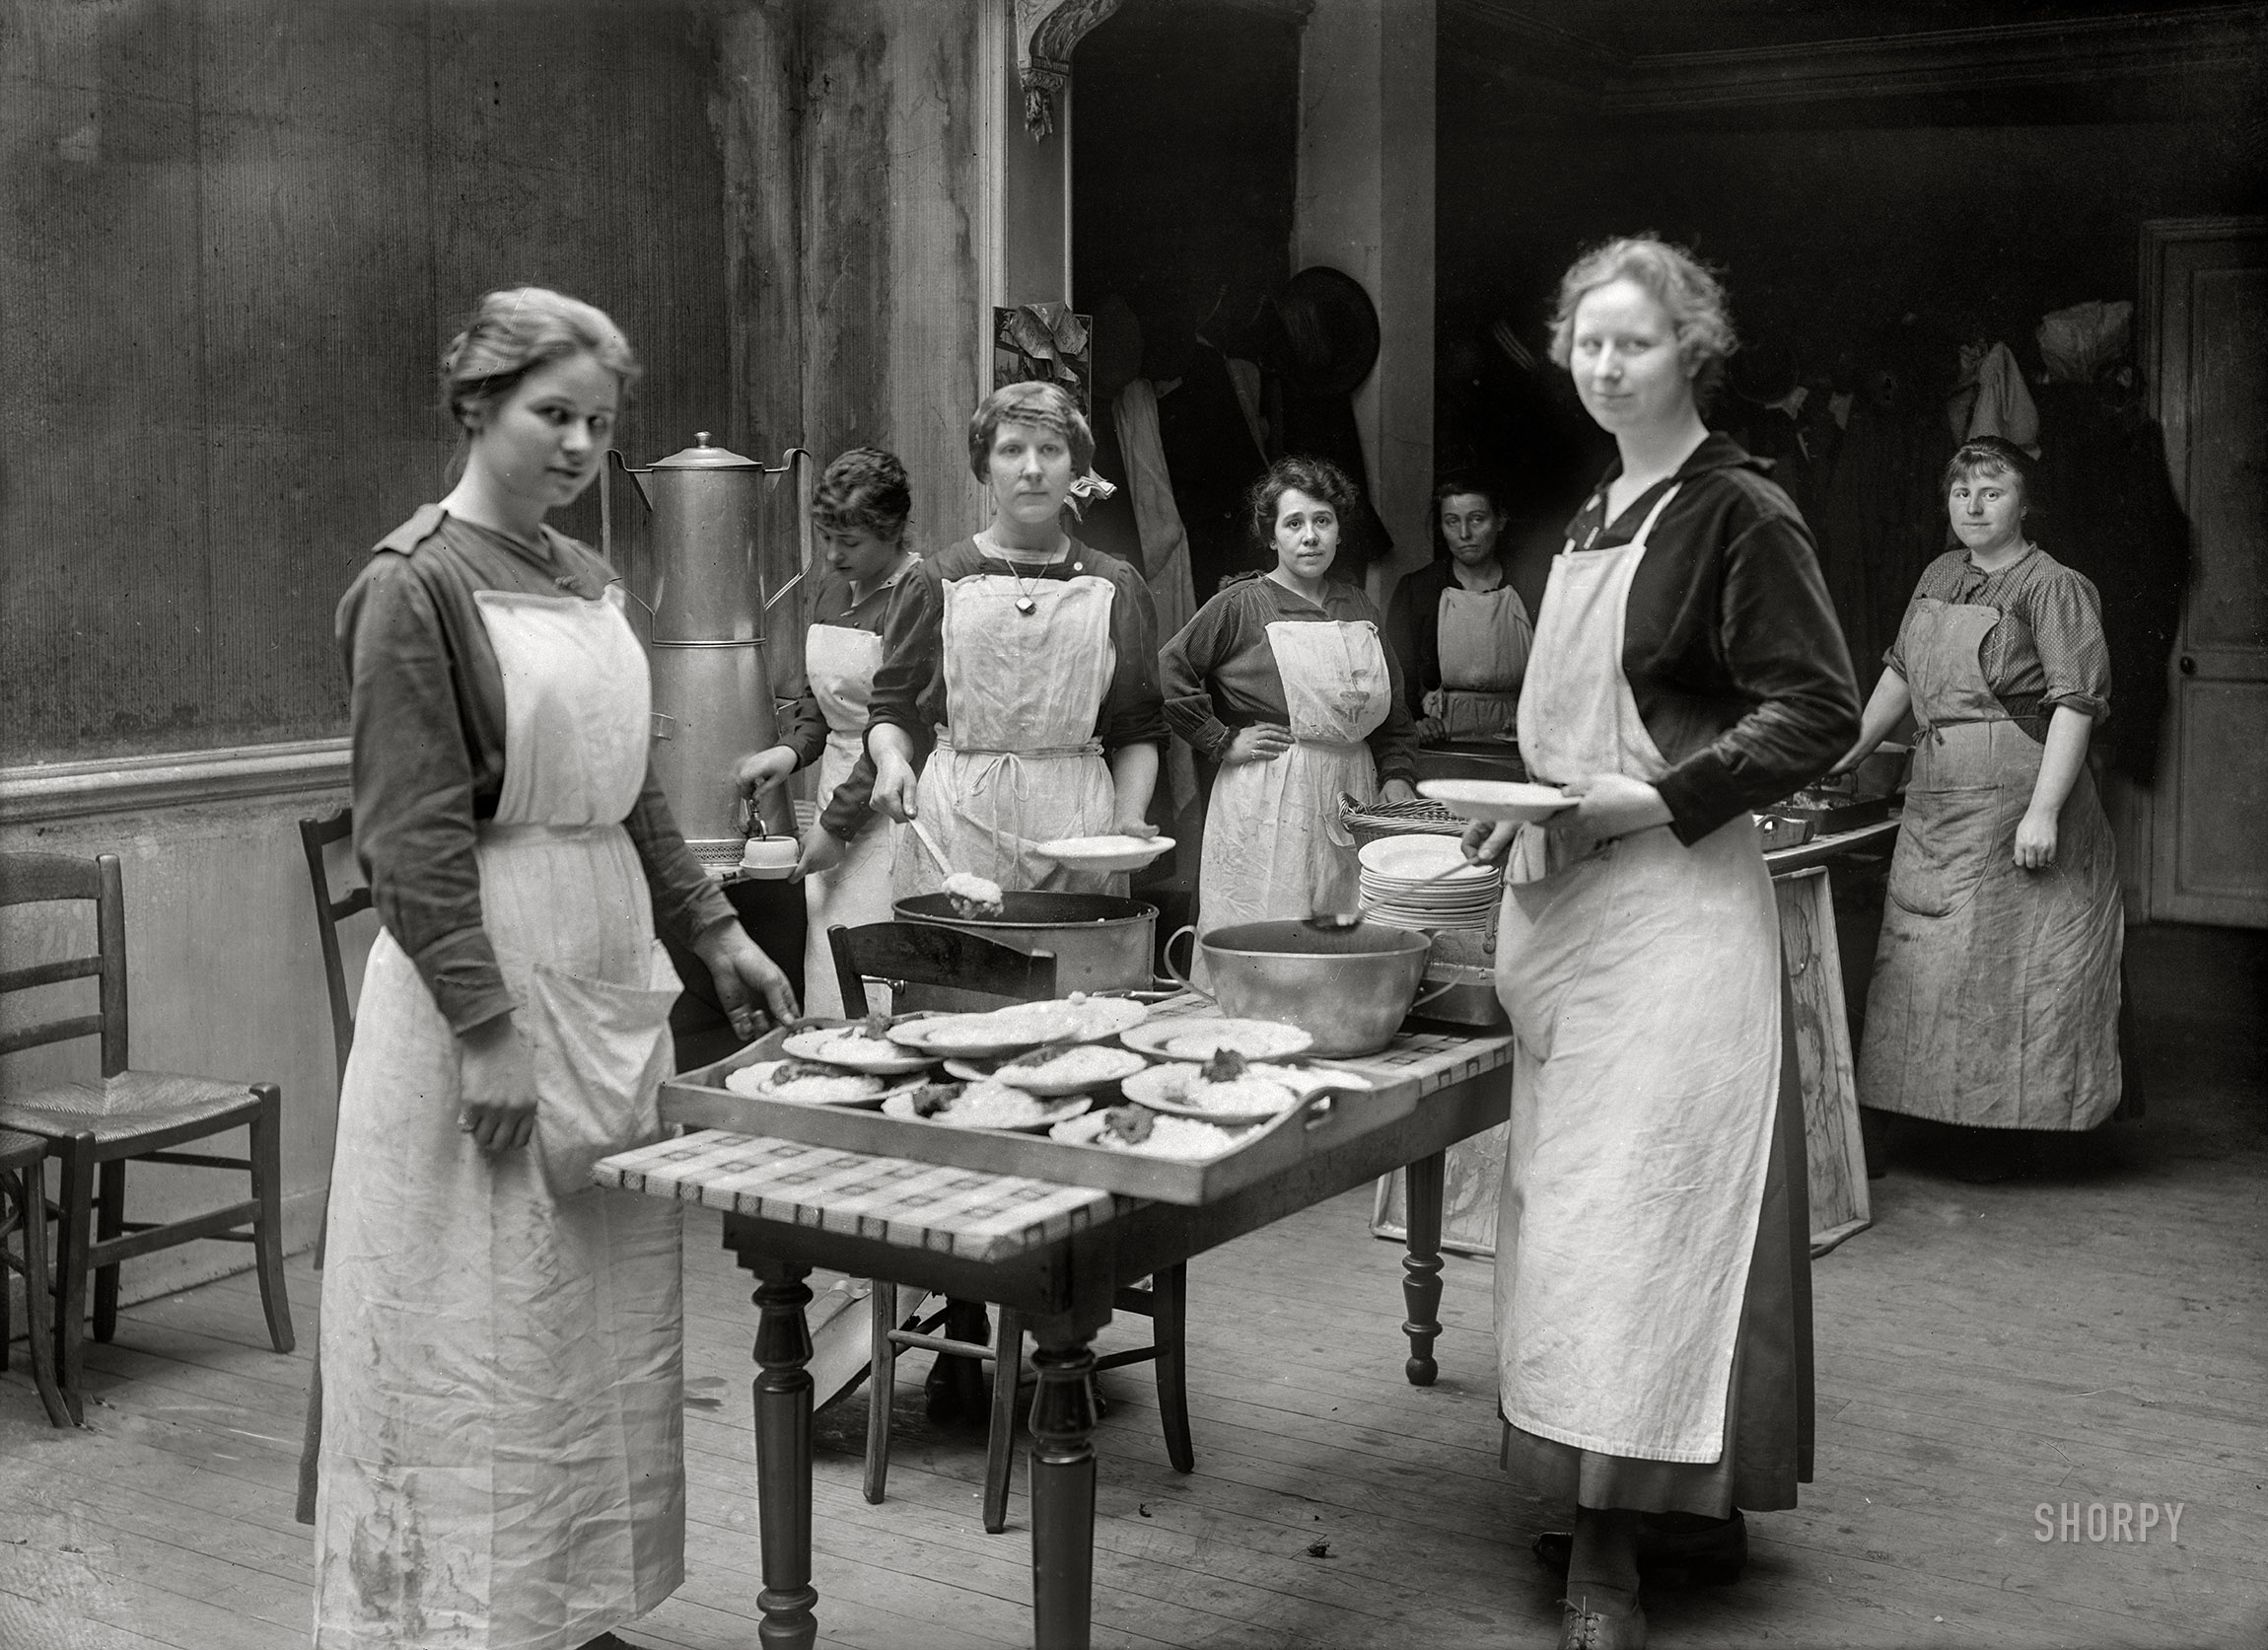 May 1918. Paris, France. "Kitchen of restaurant. American hostel for refugees -- Accueil Franco-Américain aux réfugiés Belges et Français. Supported by the American Red Cross." 5x7 inch glass negative, American National Red Cross Photograph Collection. View full size.